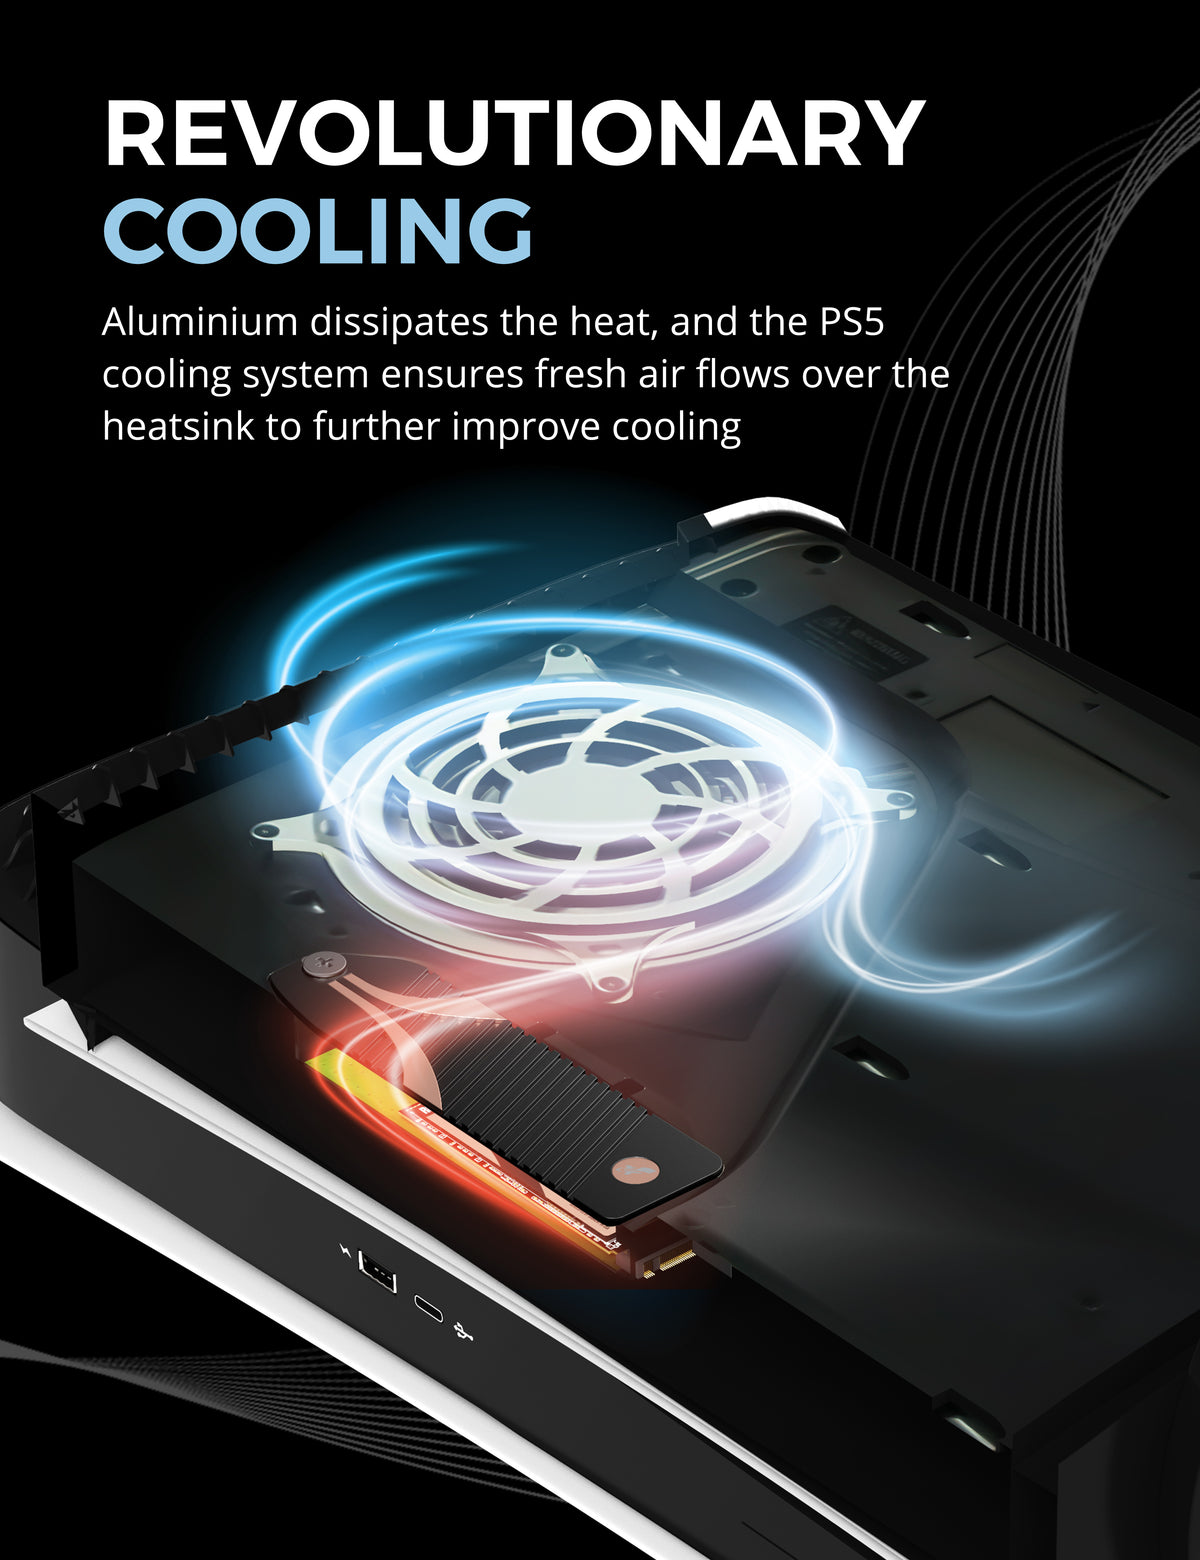 M.2 NVMe Heatsink for the PS5 Console